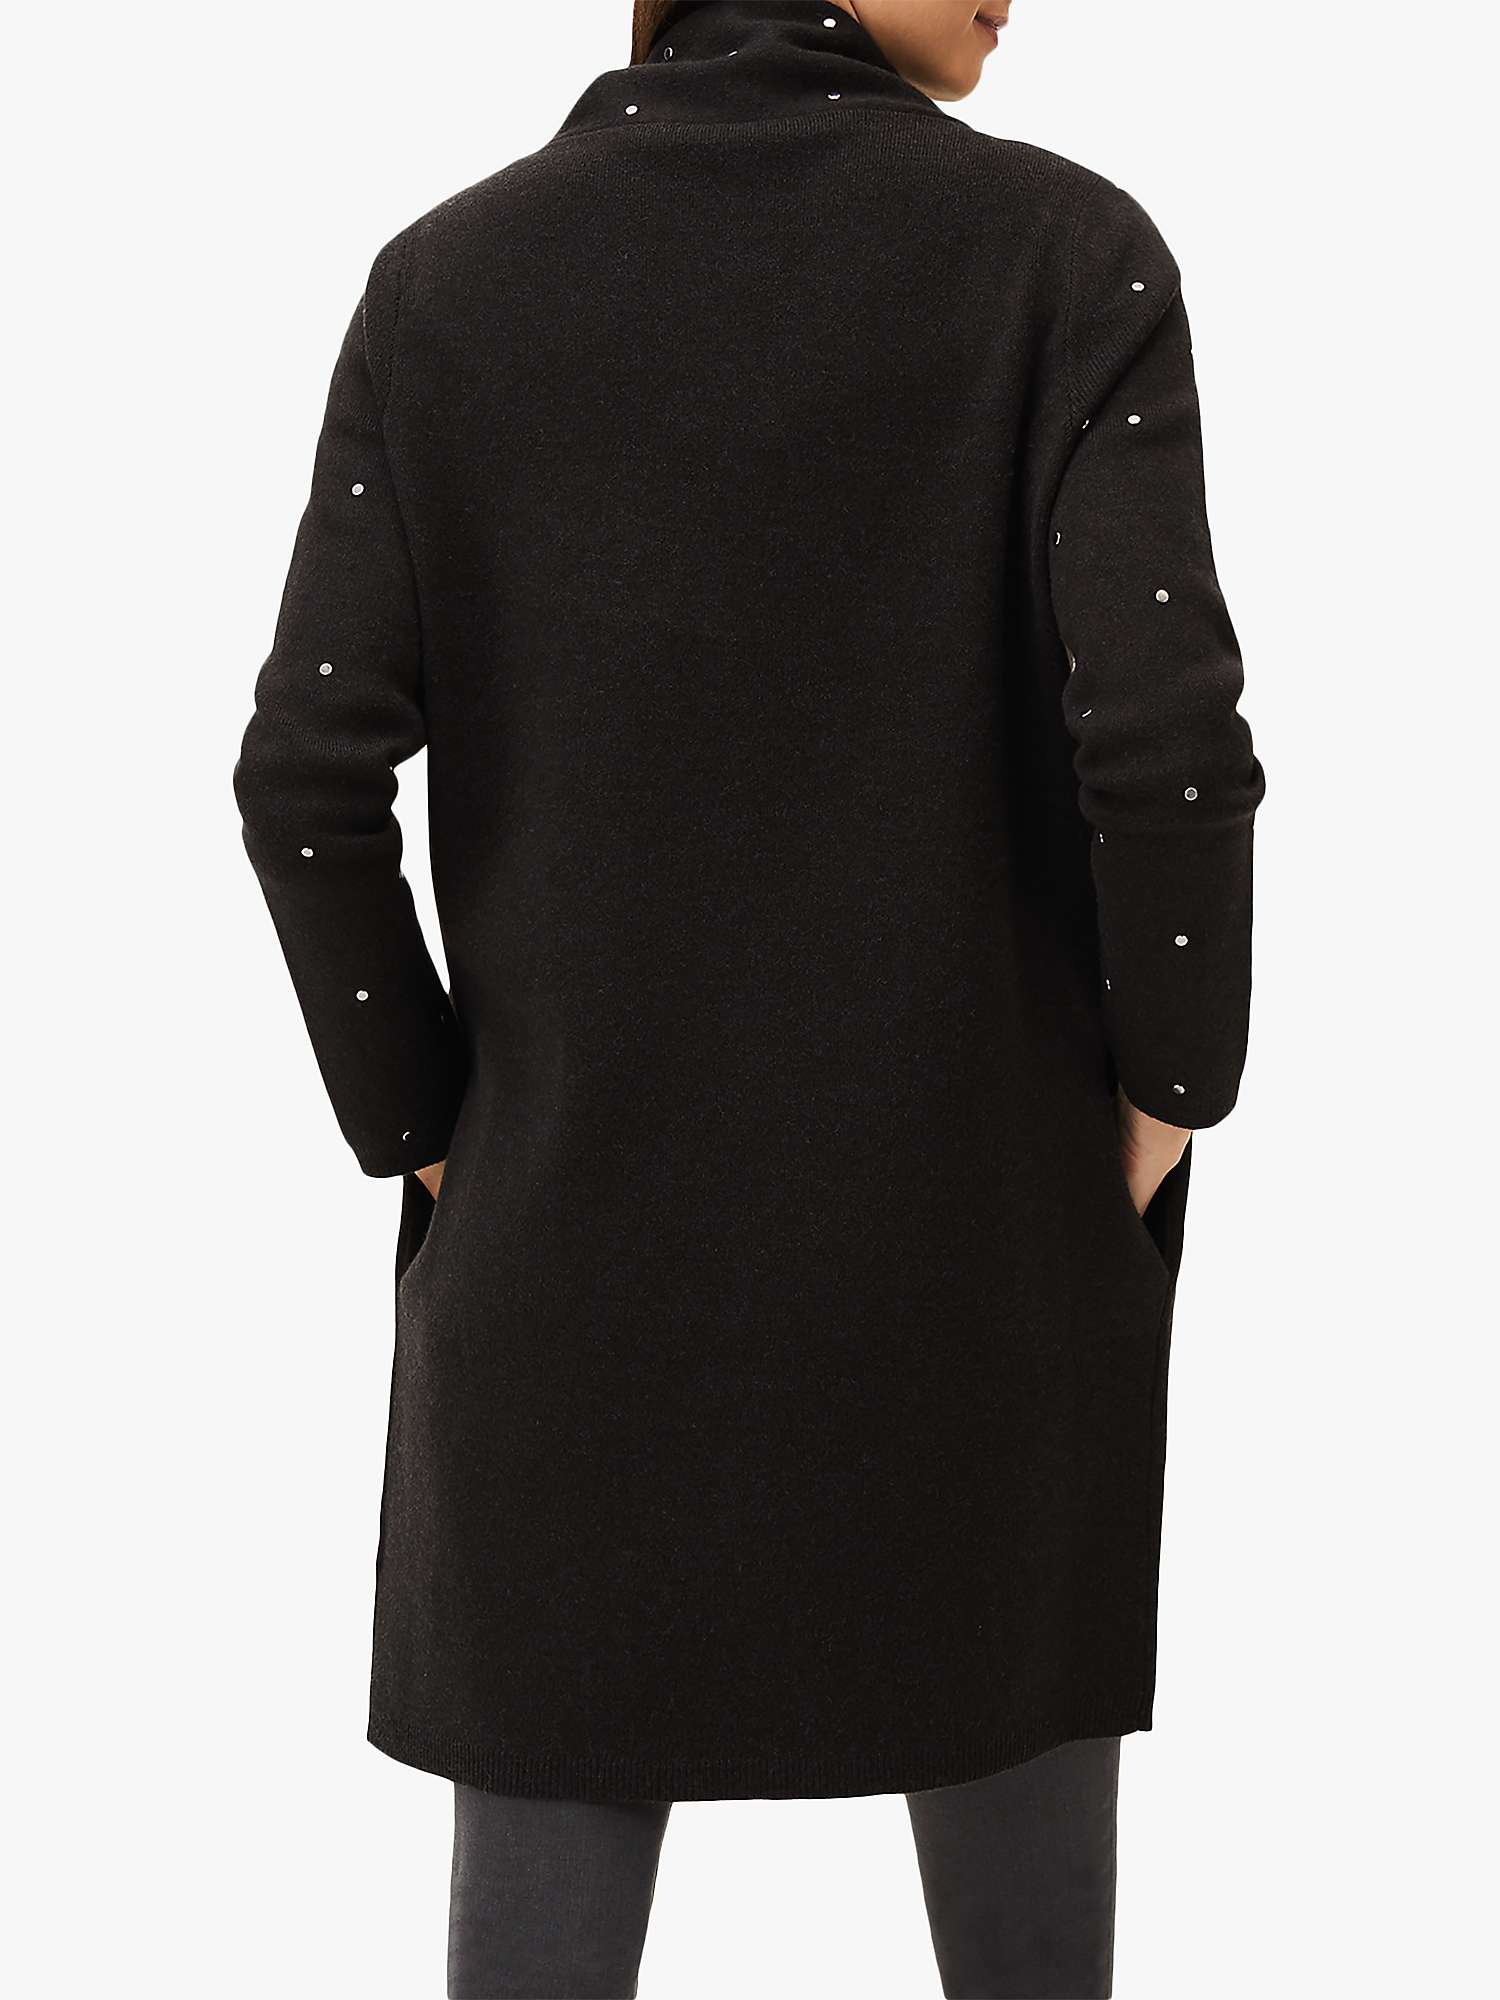 Buy Phase Eight Paloma All-Over Stud Embellished Knit Coatigan, Charcoal Online at johnlewis.com